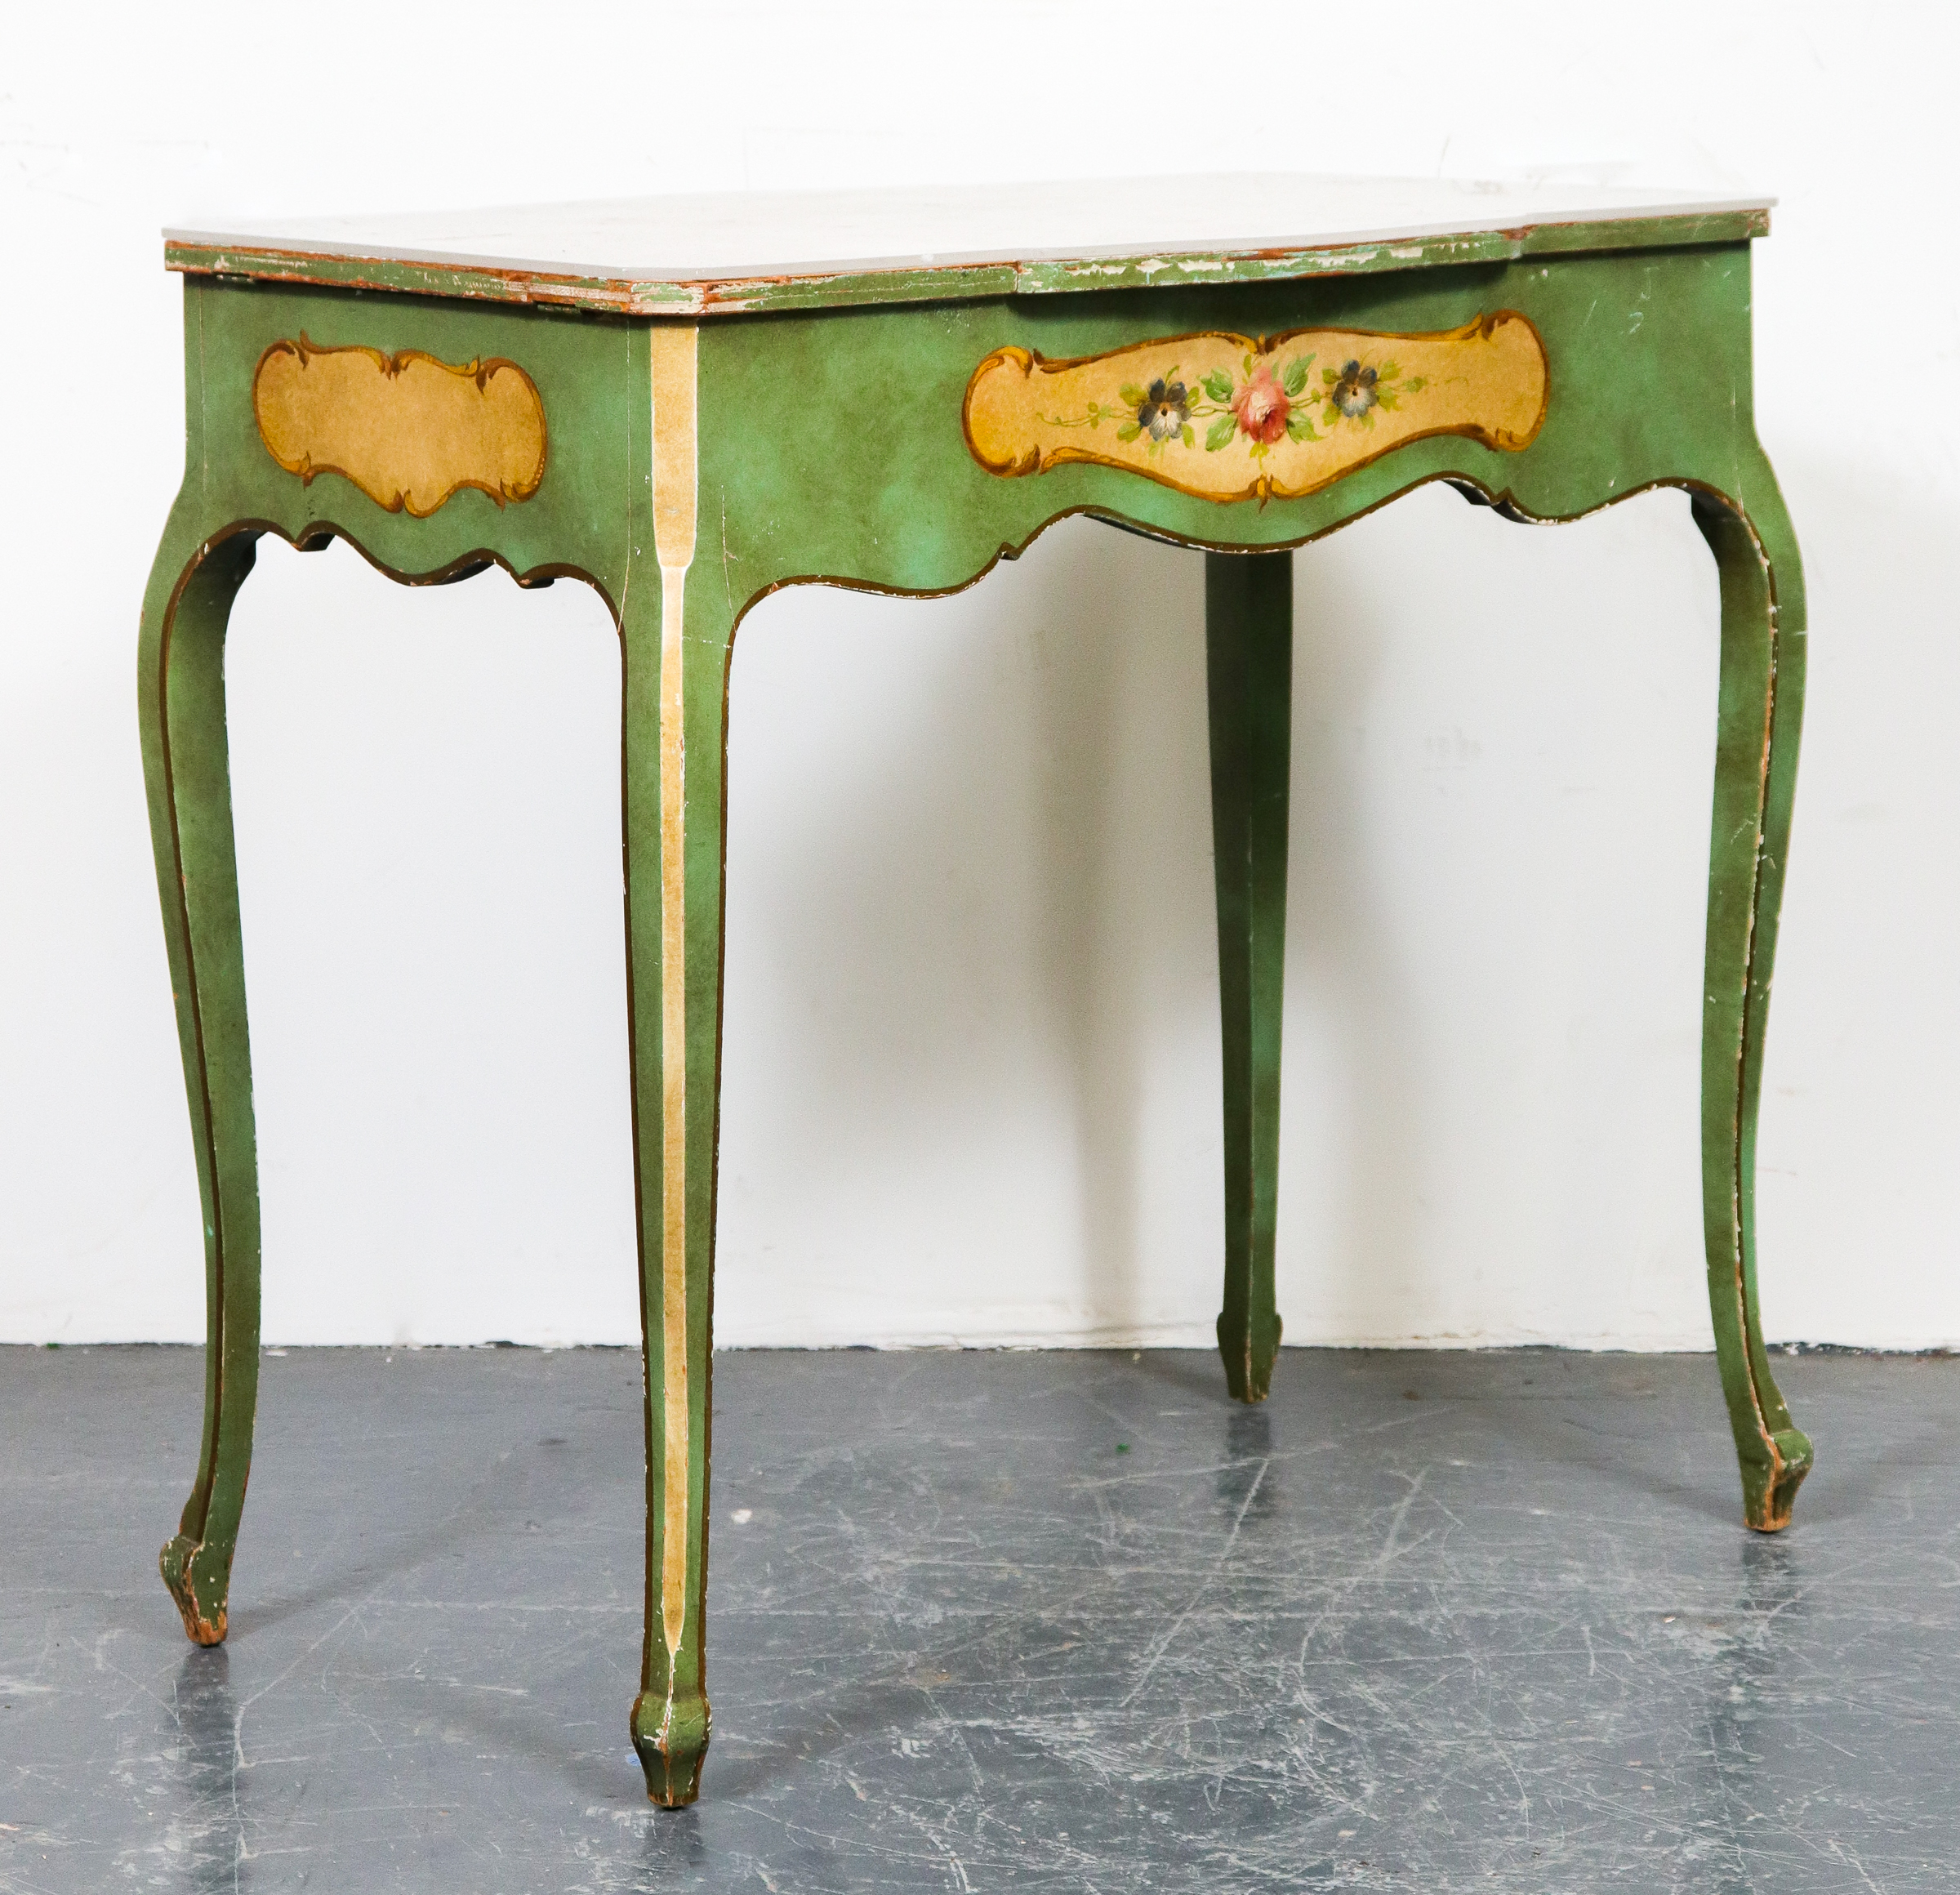 LOUIS XV STYLE HAND PAINTED VANITY 3c34a3